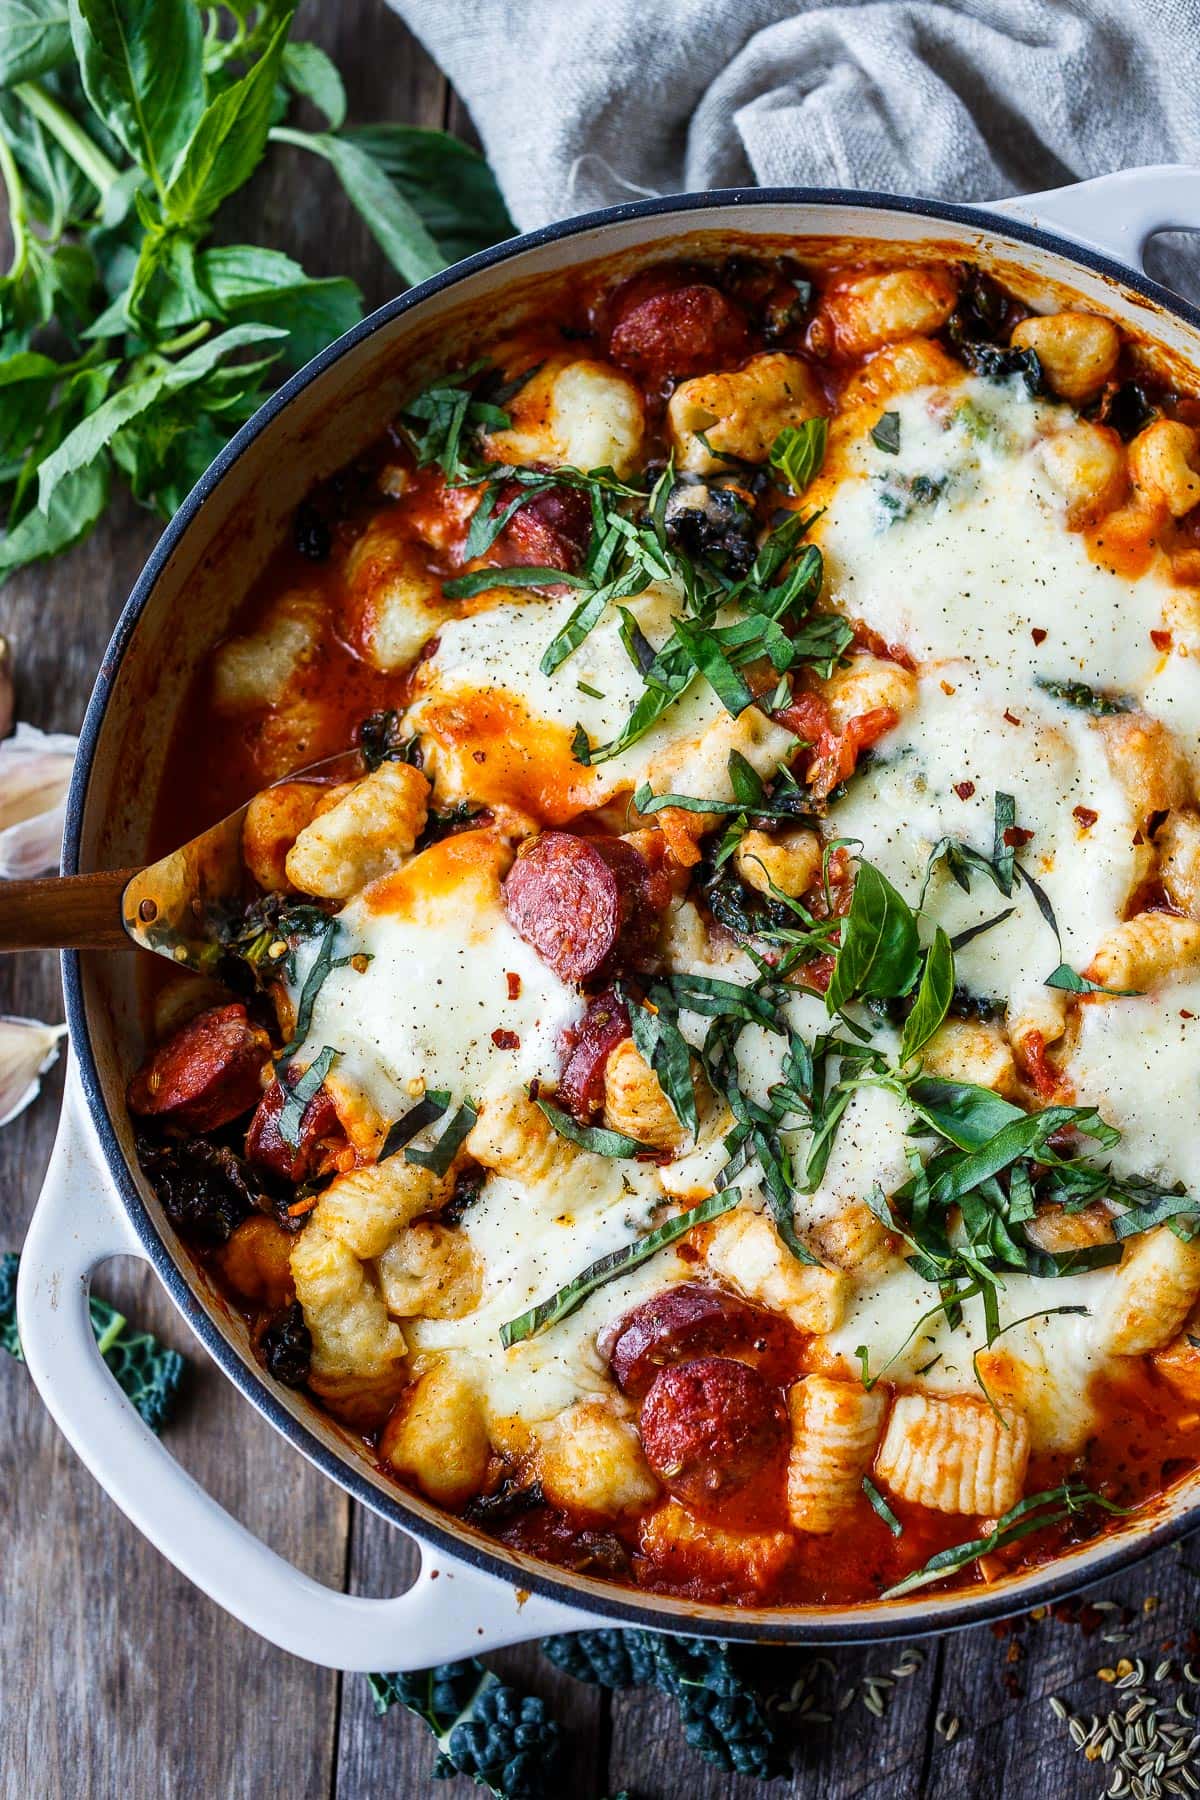 This Baked Gnocchi with Kale and Sausage is hearty and delicious. Vegetarian-adaptable and easy enough for weeknights. Comes together in about 30 minutes!